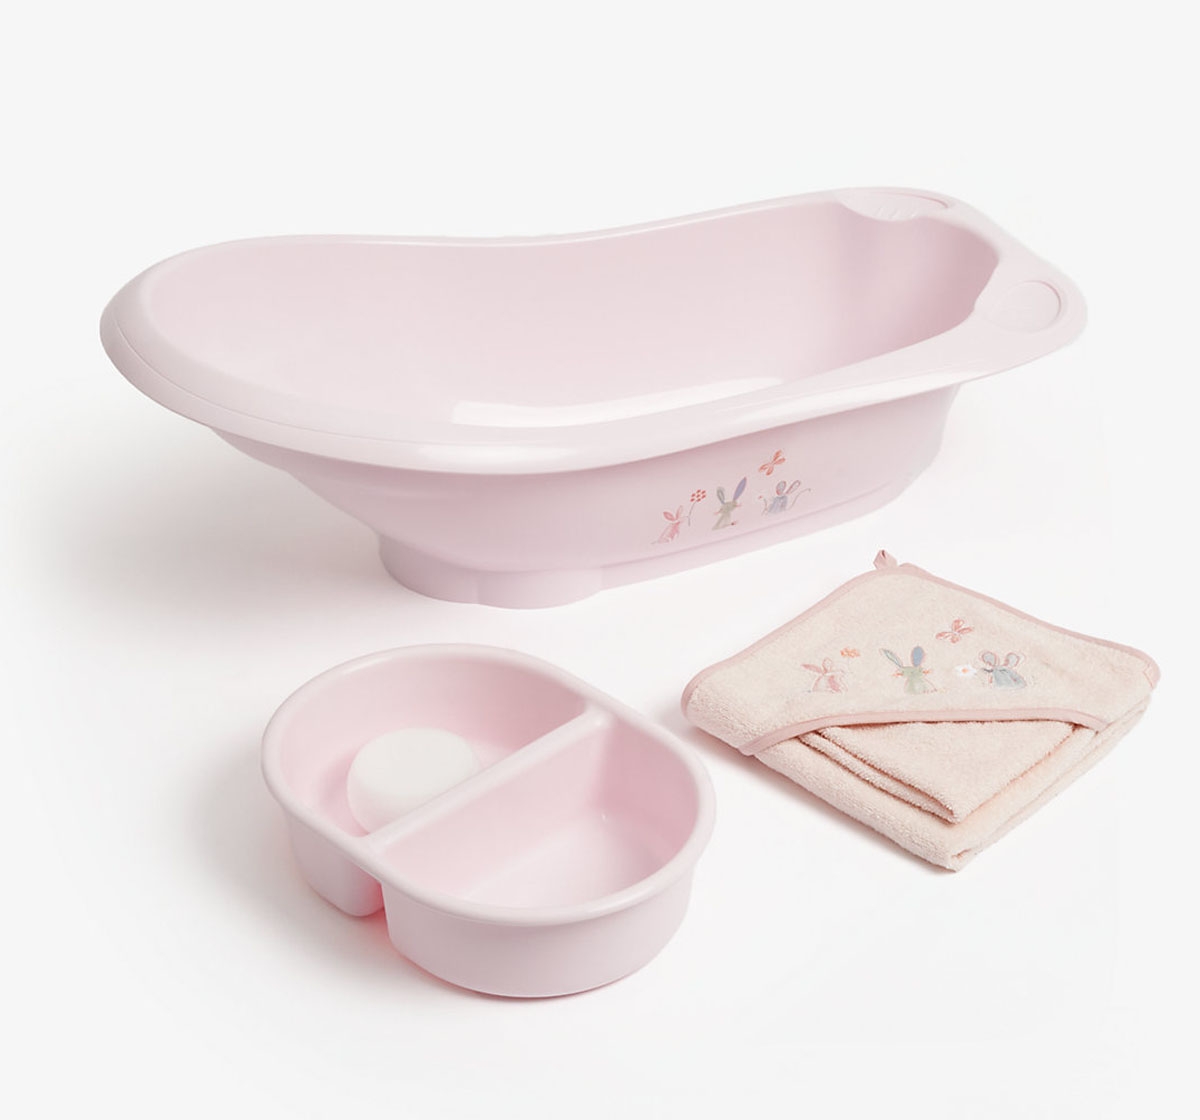 Mothercare | Mothercare Flutterby Bath Set Pink  0